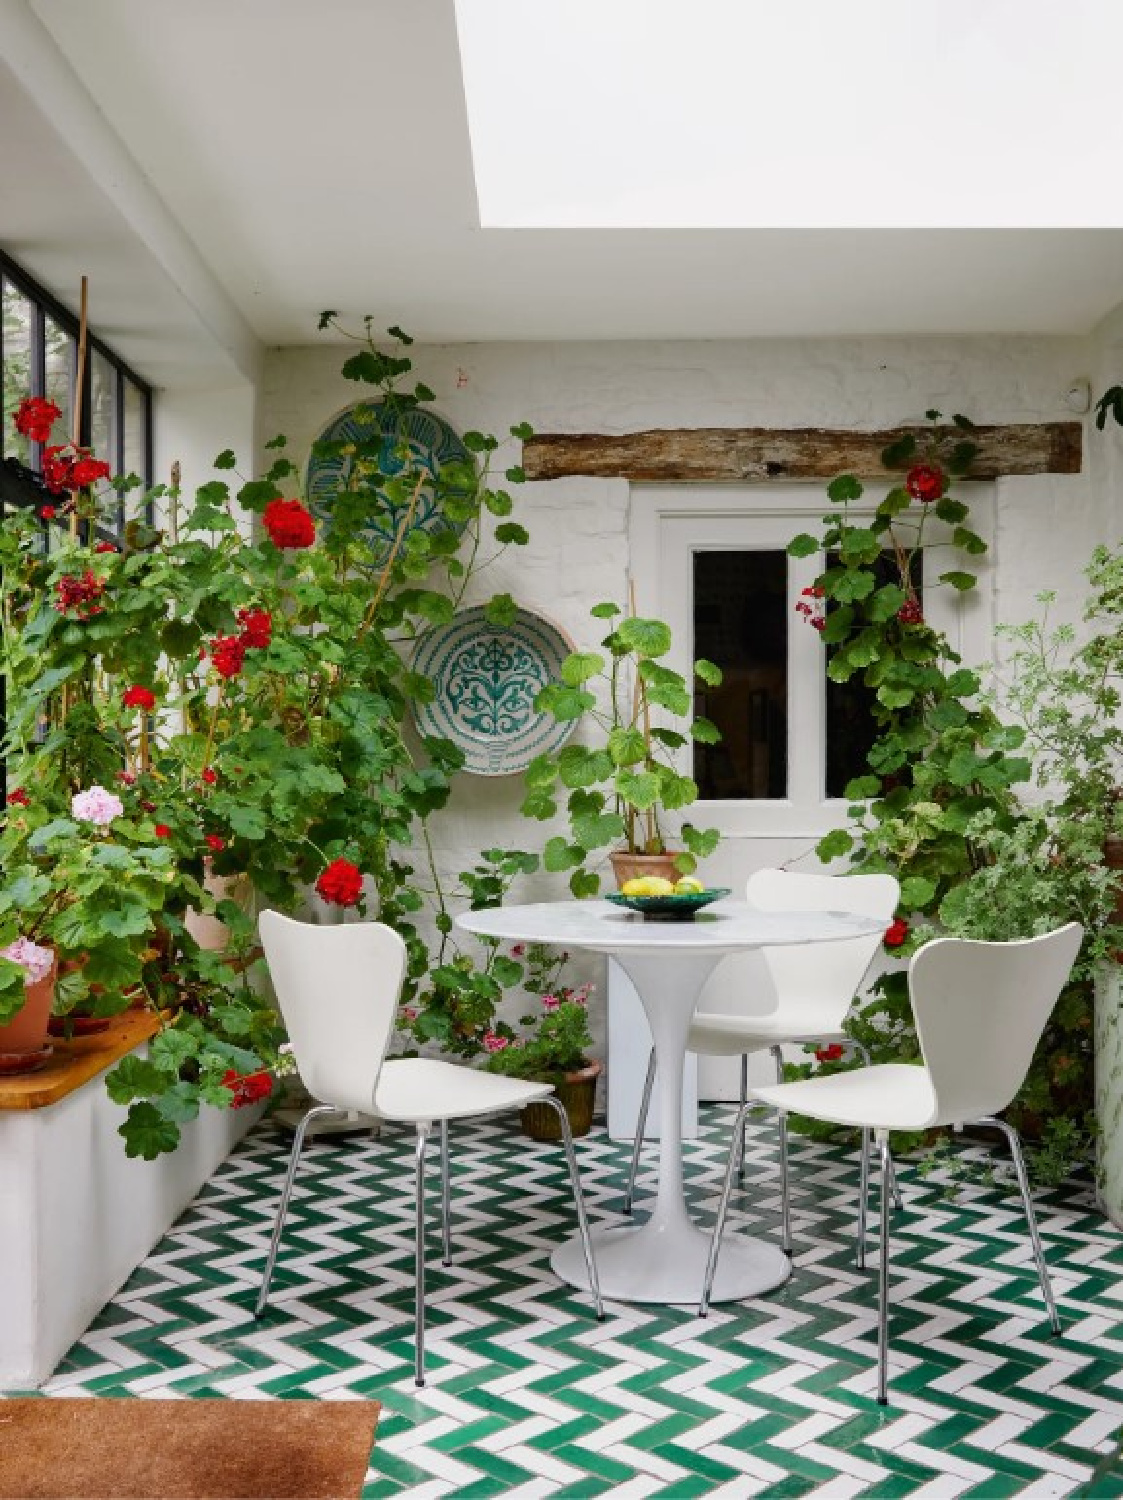 Geraniums in a garden room with green tiles at Cotswold home of Renshaw and Sarah Hiscox in HouseandGardenUK (photo Paul Massey). #cotswoldcottage #englishcountrystyle